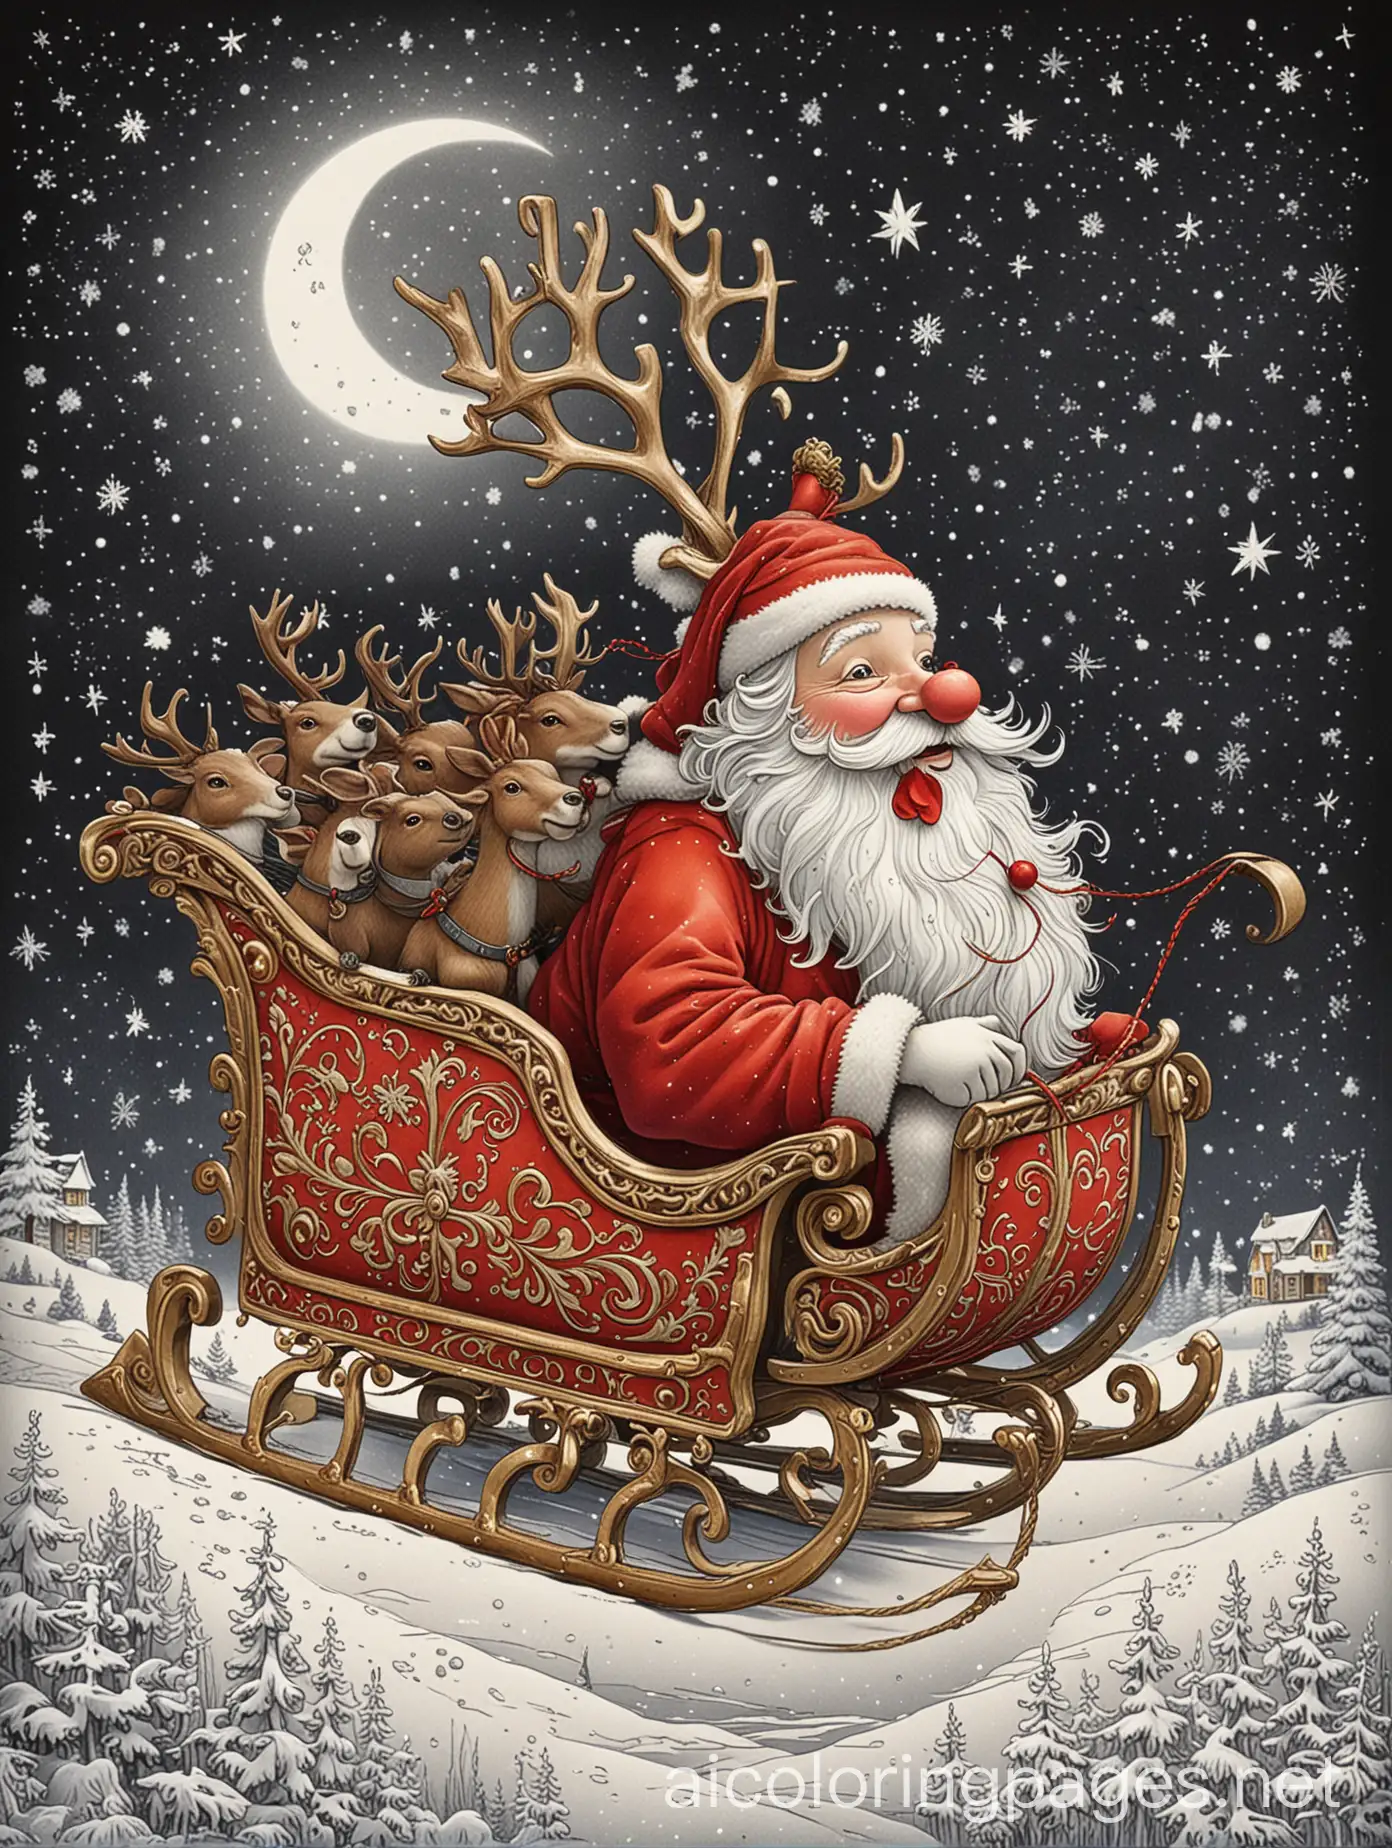 Robust, jolly Santa, sleigh, eight tiny reindeer, starry snowy night, moonlight, face, ornate sleigh, festive decorations, lively, red harness, whimsical, kid-friendly, clear background, distinct thick lines, toddler, ample white space, highly detailed, intricate, elaborate, Simplicity, Ample White Space, black and white, line art, plain white background, easy to distinguish, color within the lines, Simple for kids to color